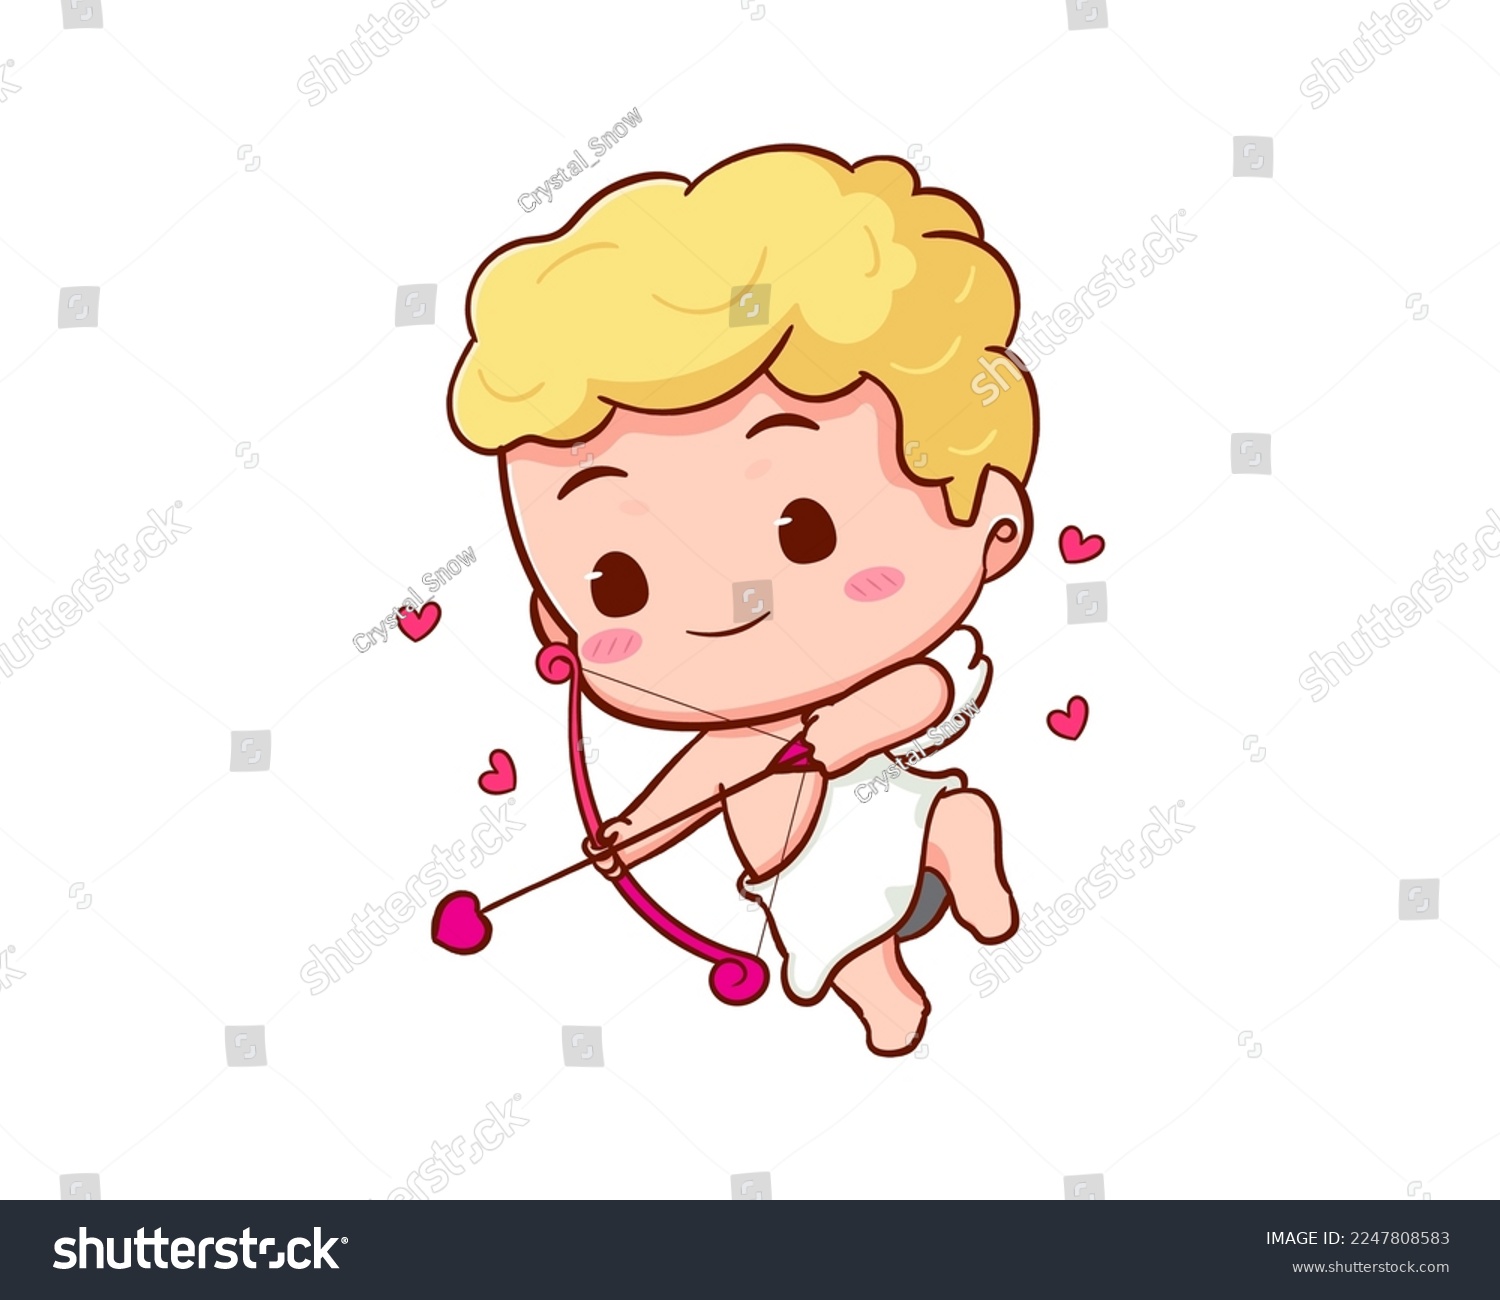 SVG of Cute Adorable Cupid cartoon character. Amur babies, little angels or god eros. Valentines day concept design. Adorable angel in love. Kawaii chibi vector character. Isolated white background. svg